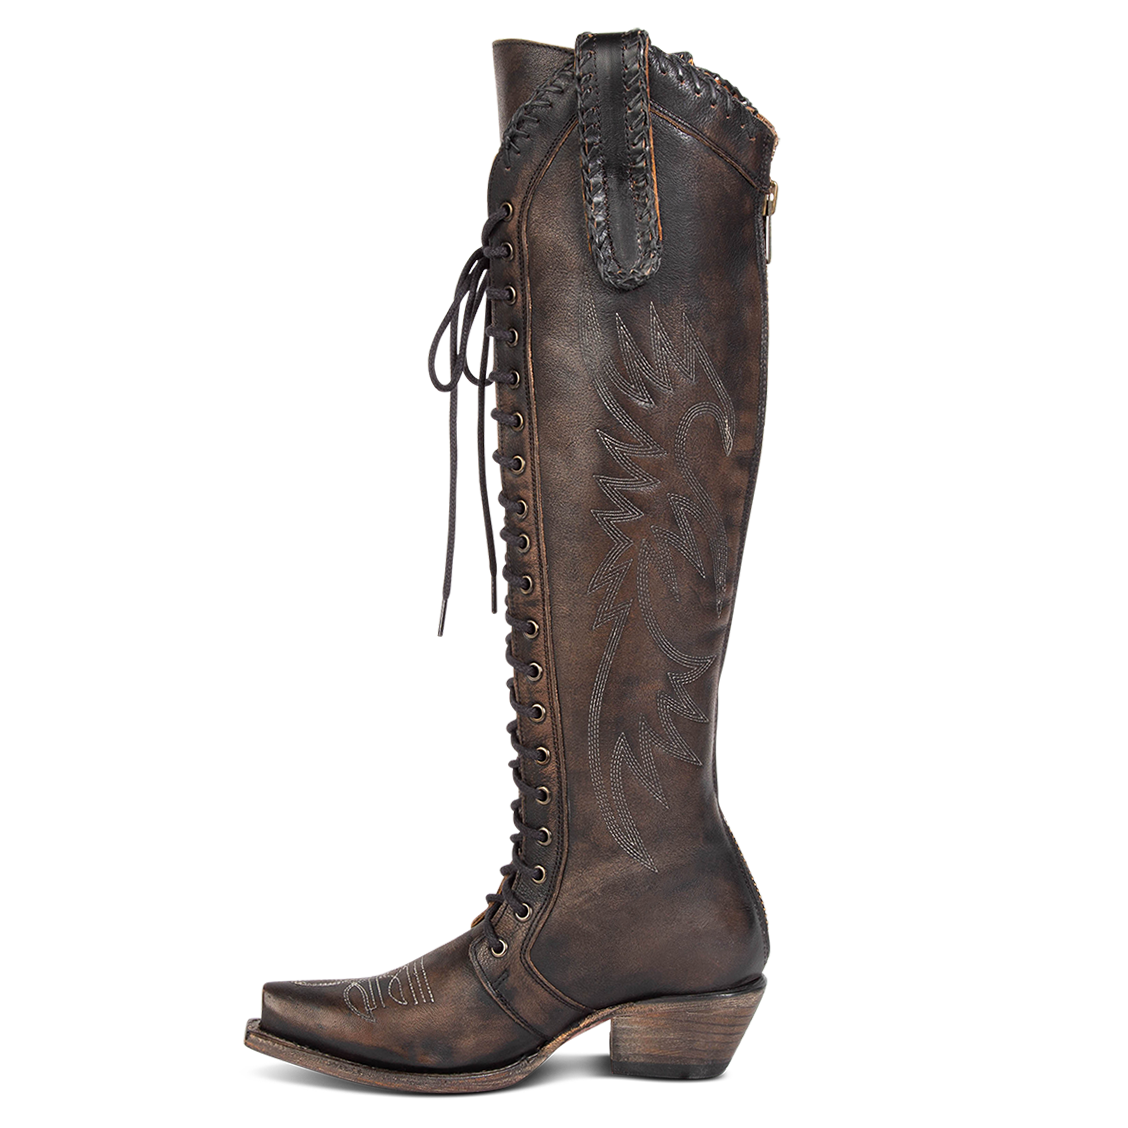 Inside view showing tall lace up shaft, woven leather accents, and contrasting stitch detailing on FREEBIRD women's Wilder black boot